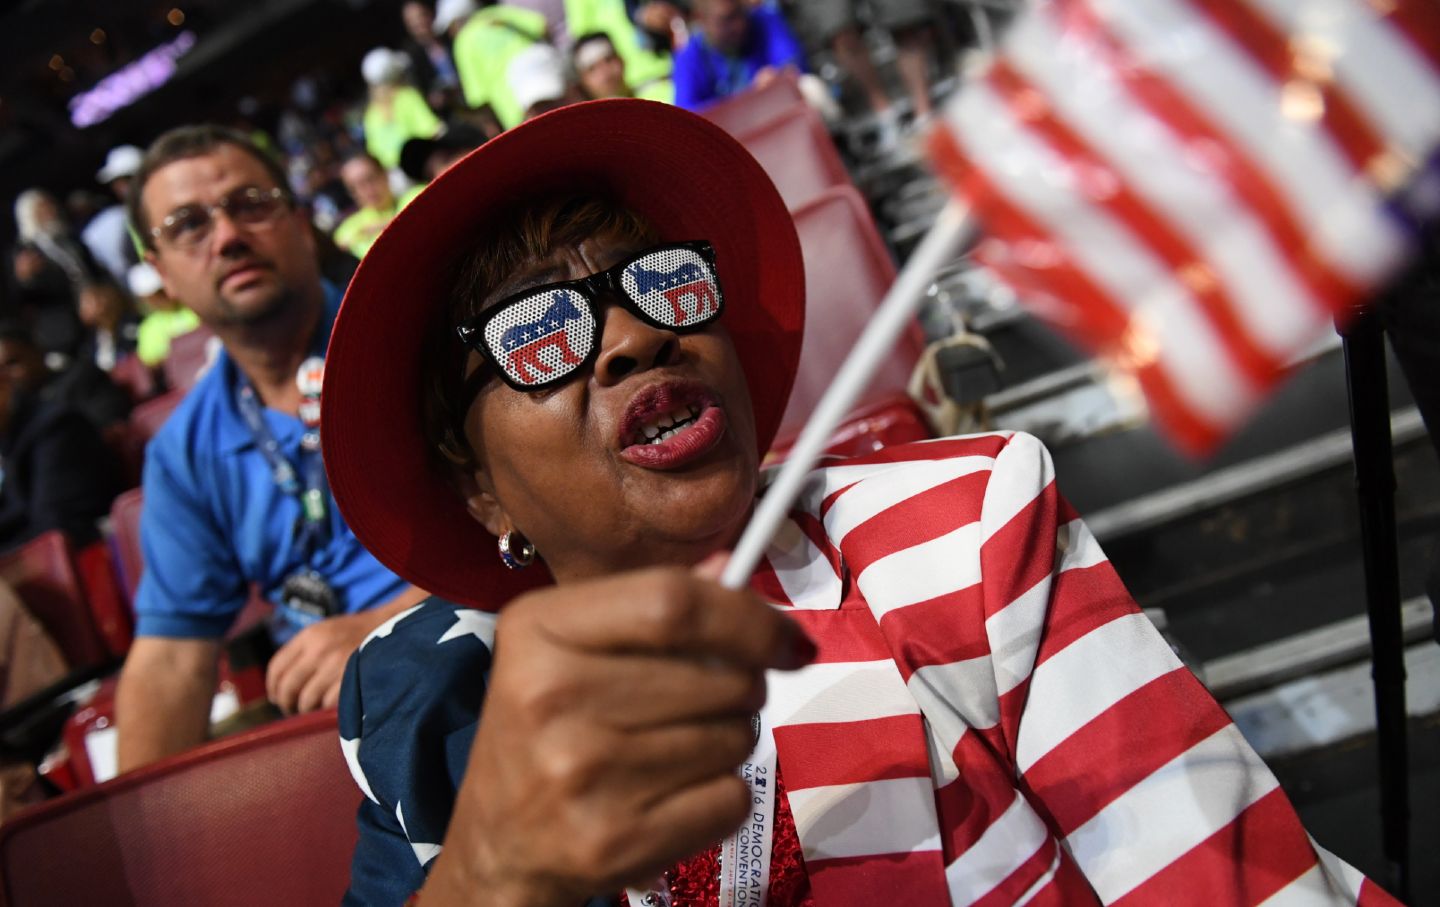 A delegate wearing Democratic Party sunglasses and an American flag suit waves an American flag.